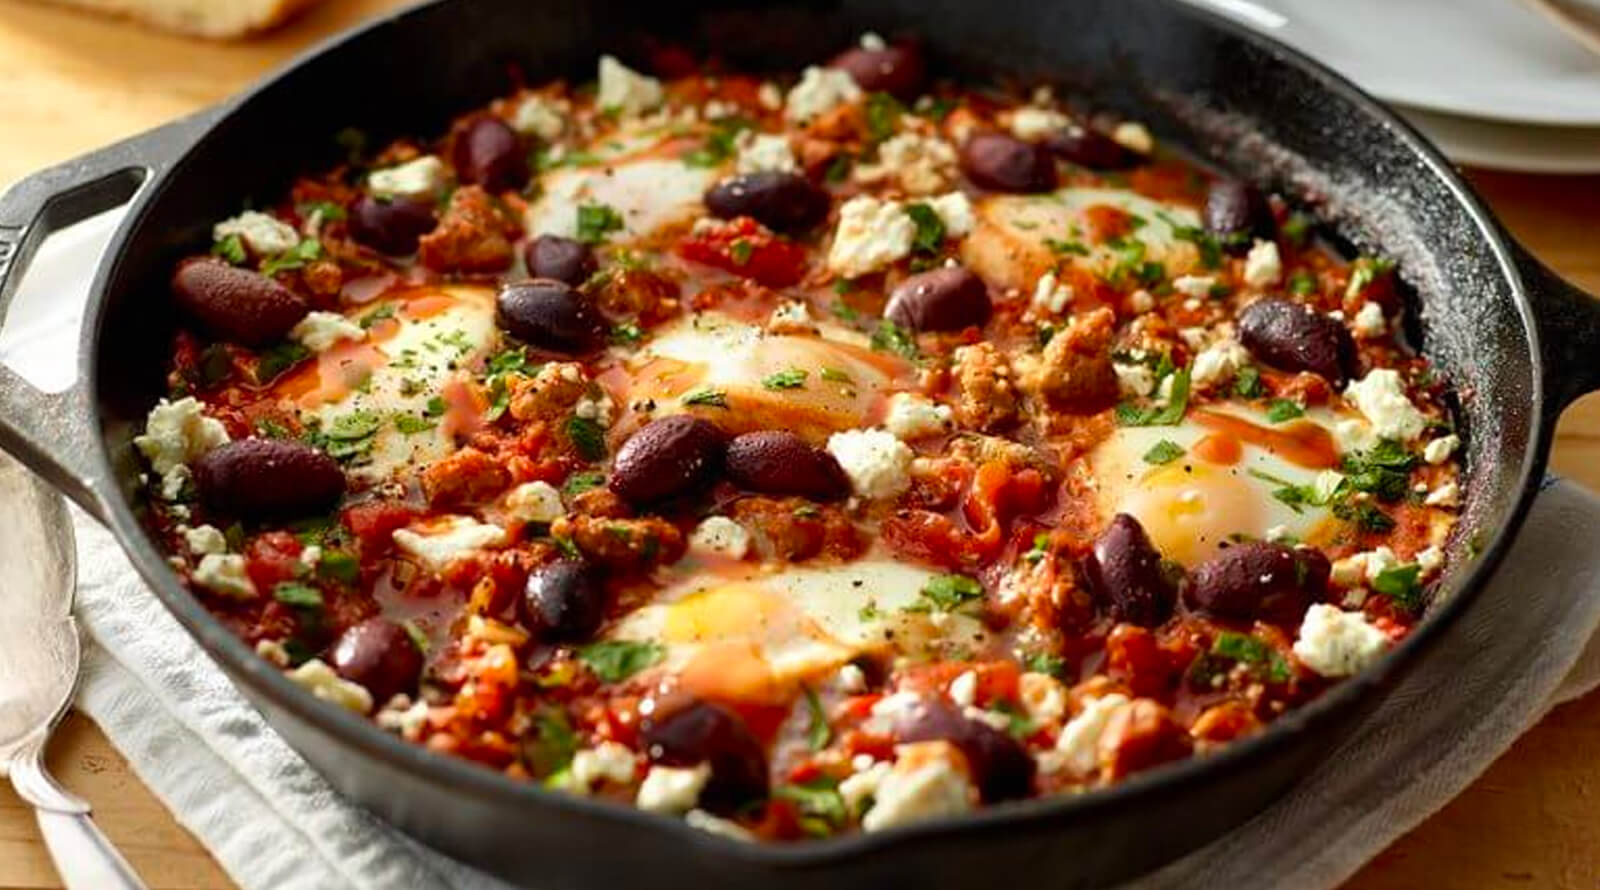 A delicious cask iron skillet filled with turkey shakshuka